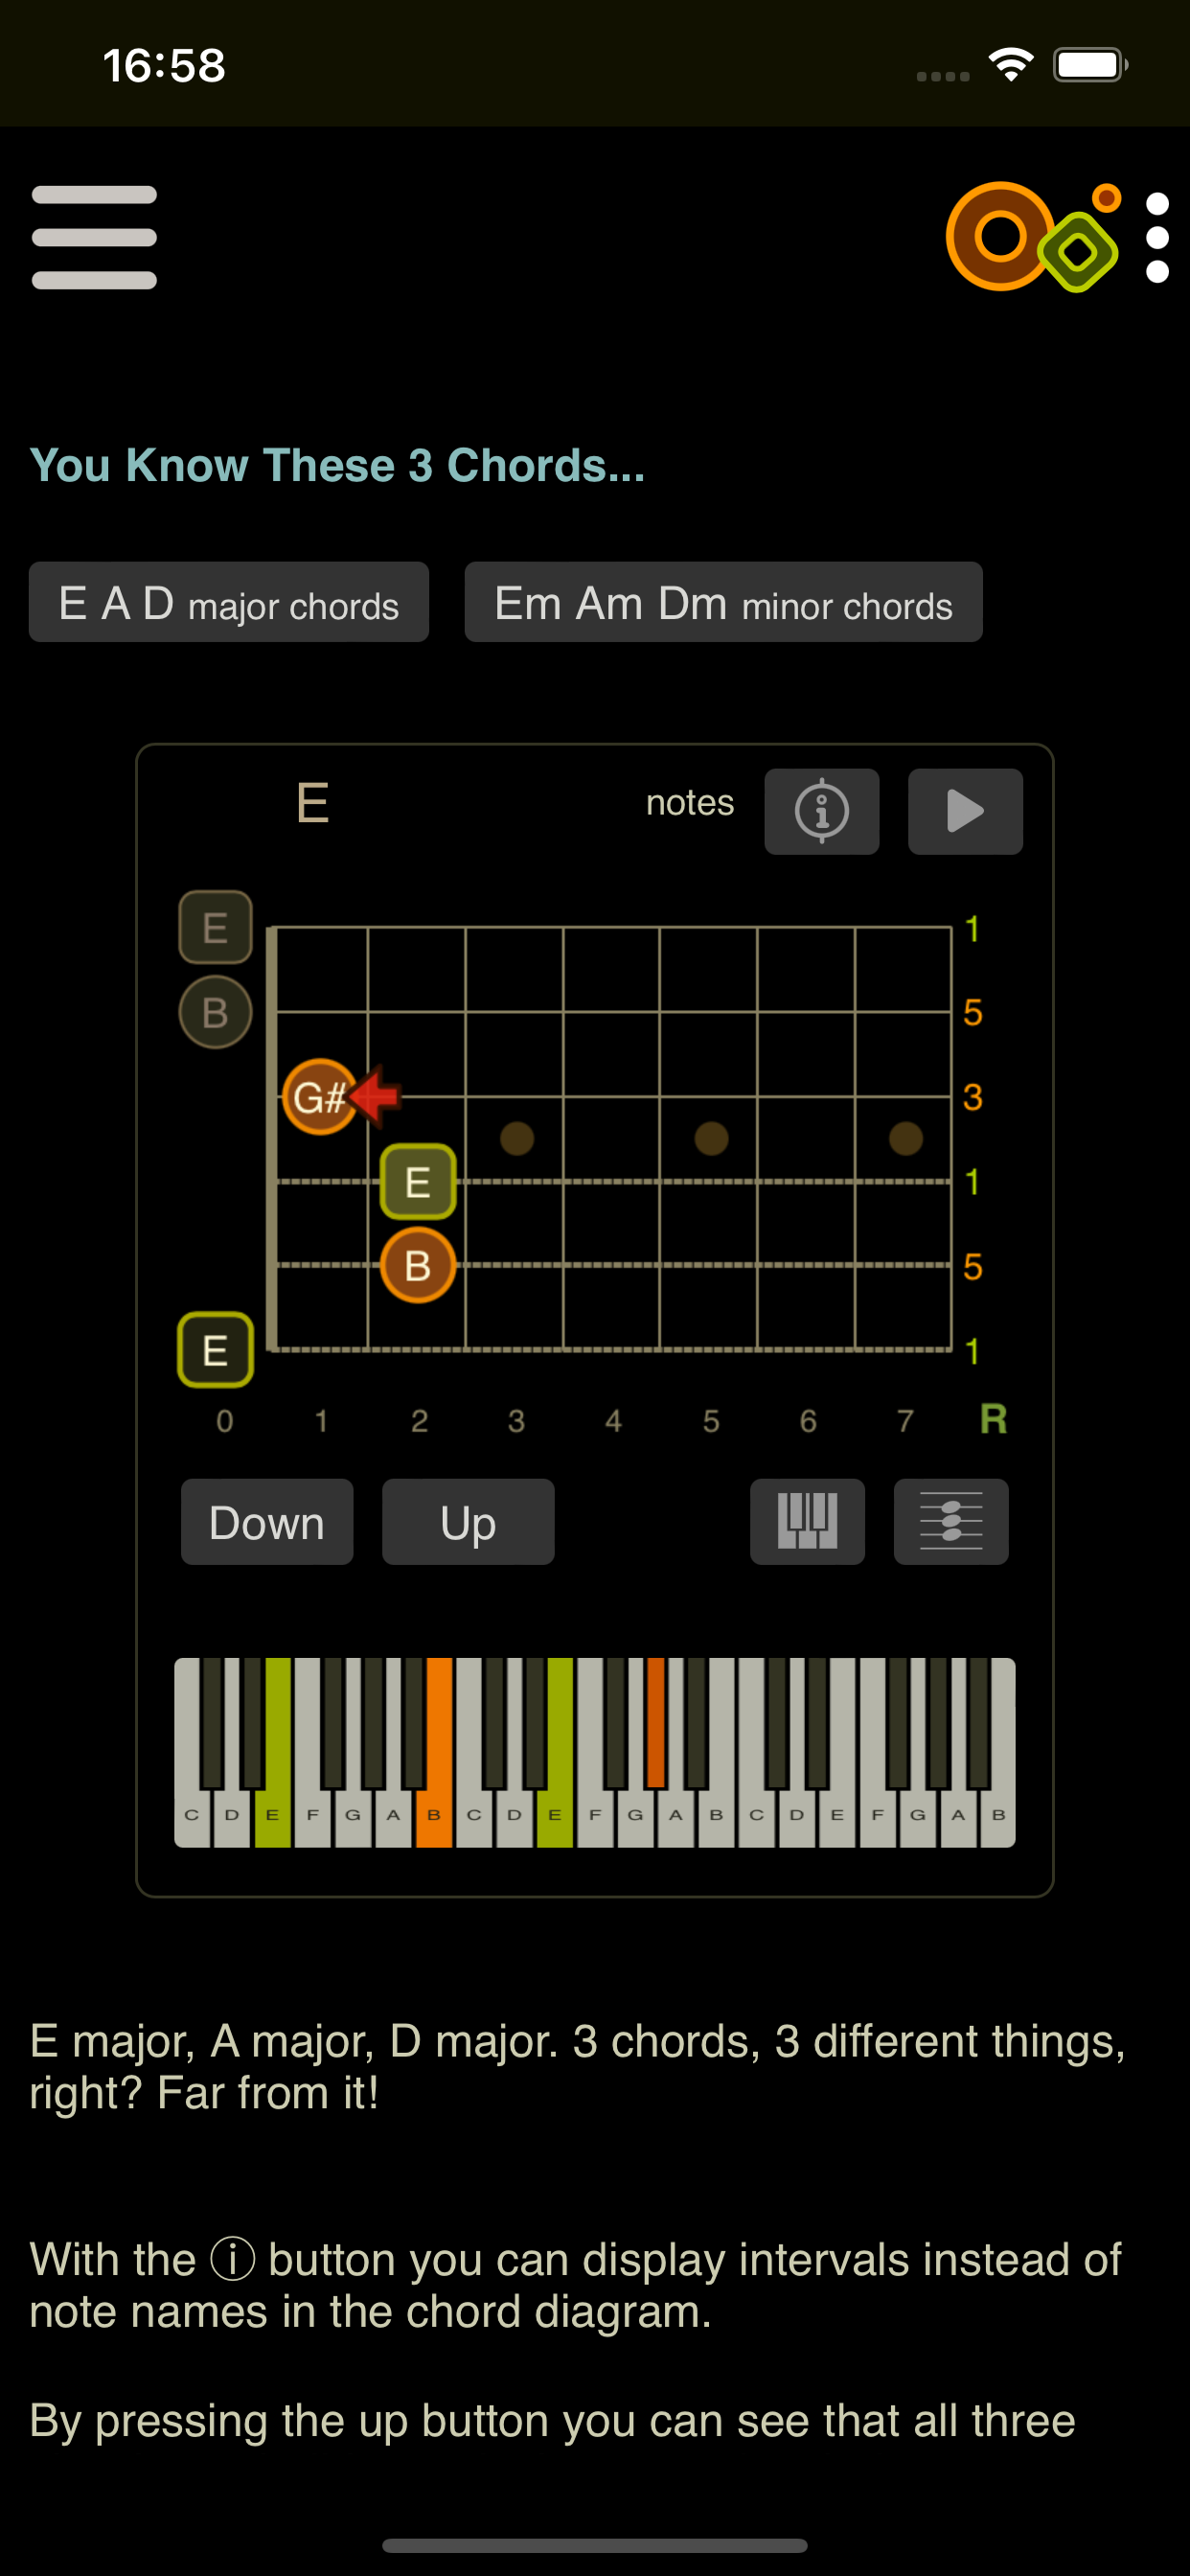 Oolimo app animated chord diagrams with piano keyboard